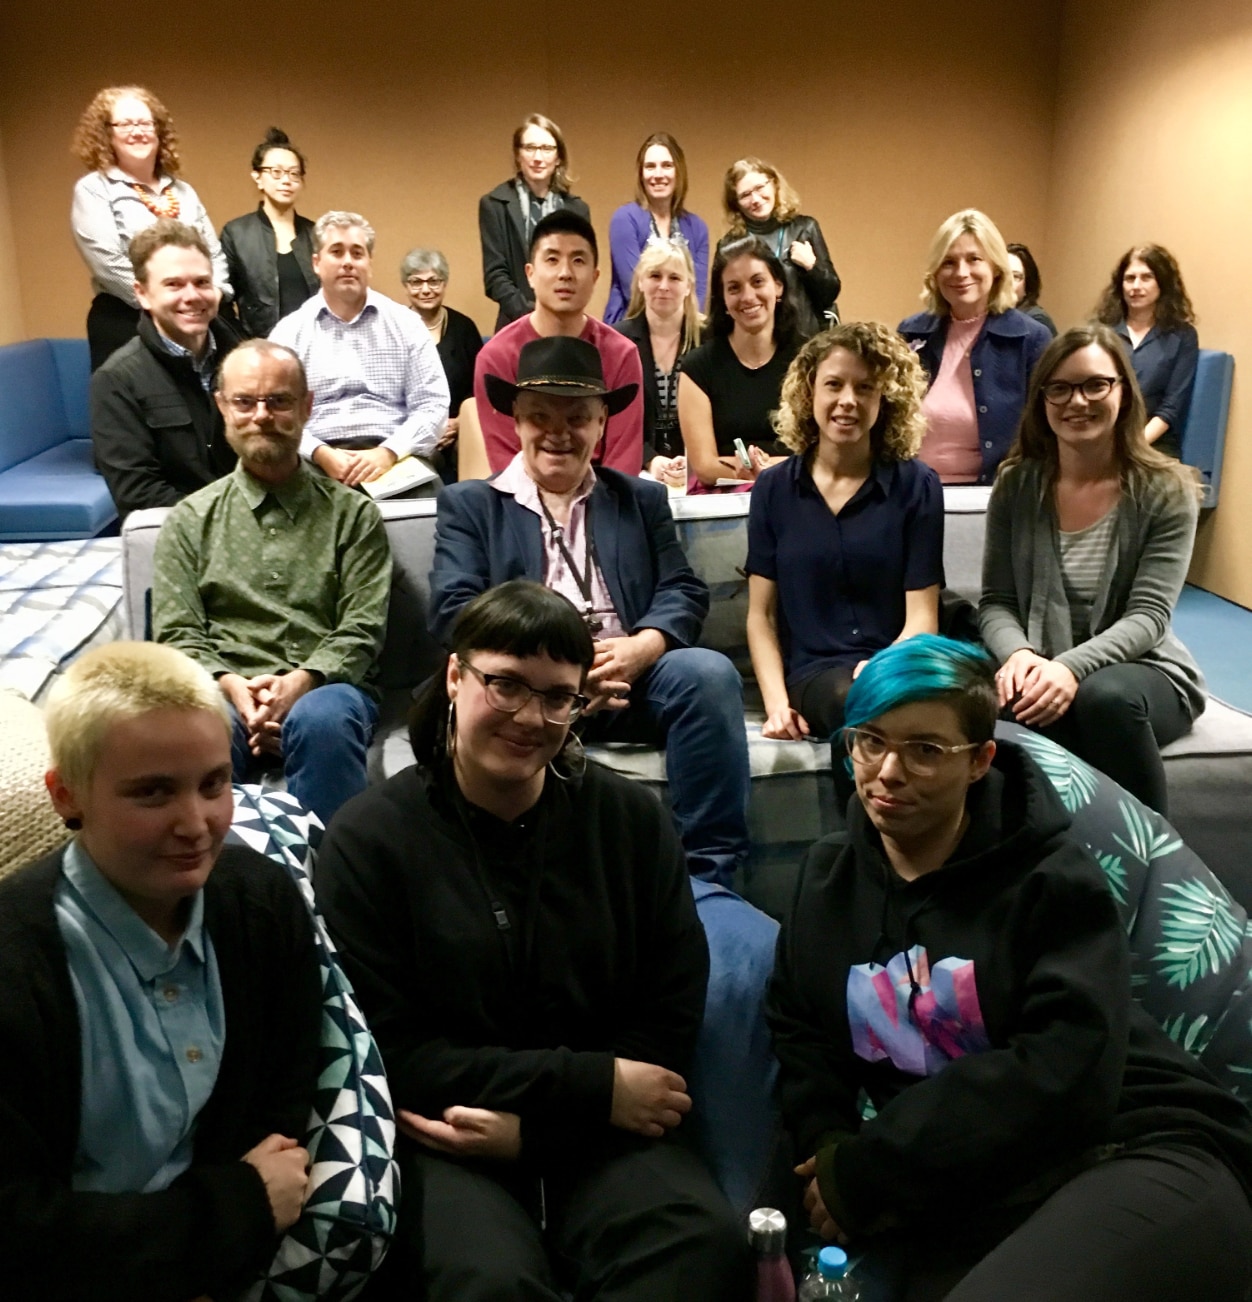 Attendees at SBS's Reconciliation Film Club event, In My Own Words